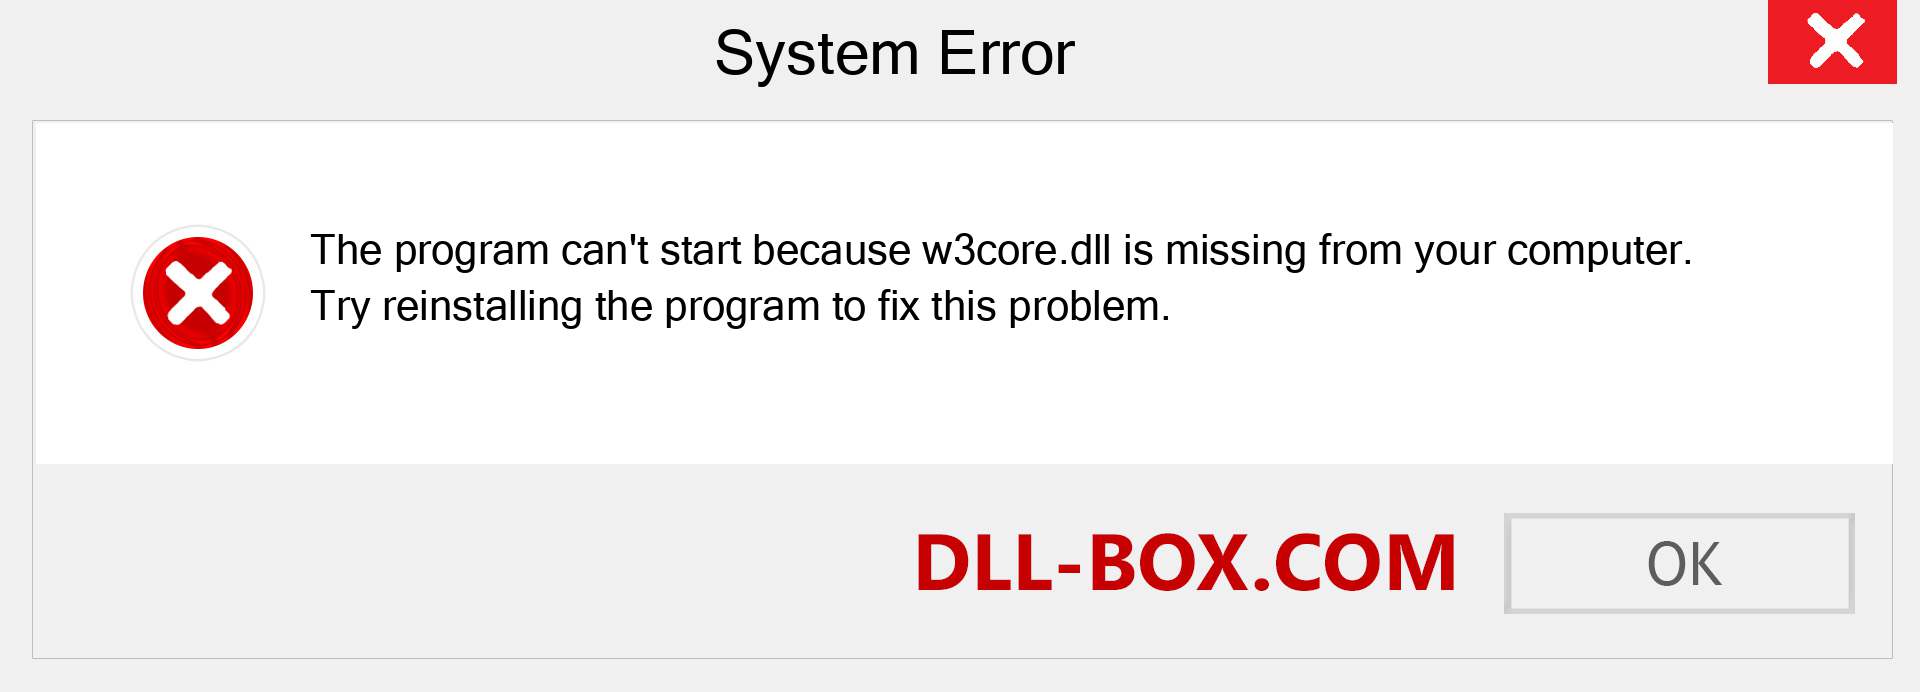  w3core.dll file is missing?. Download for Windows 7, 8, 10 - Fix  w3core dll Missing Error on Windows, photos, images